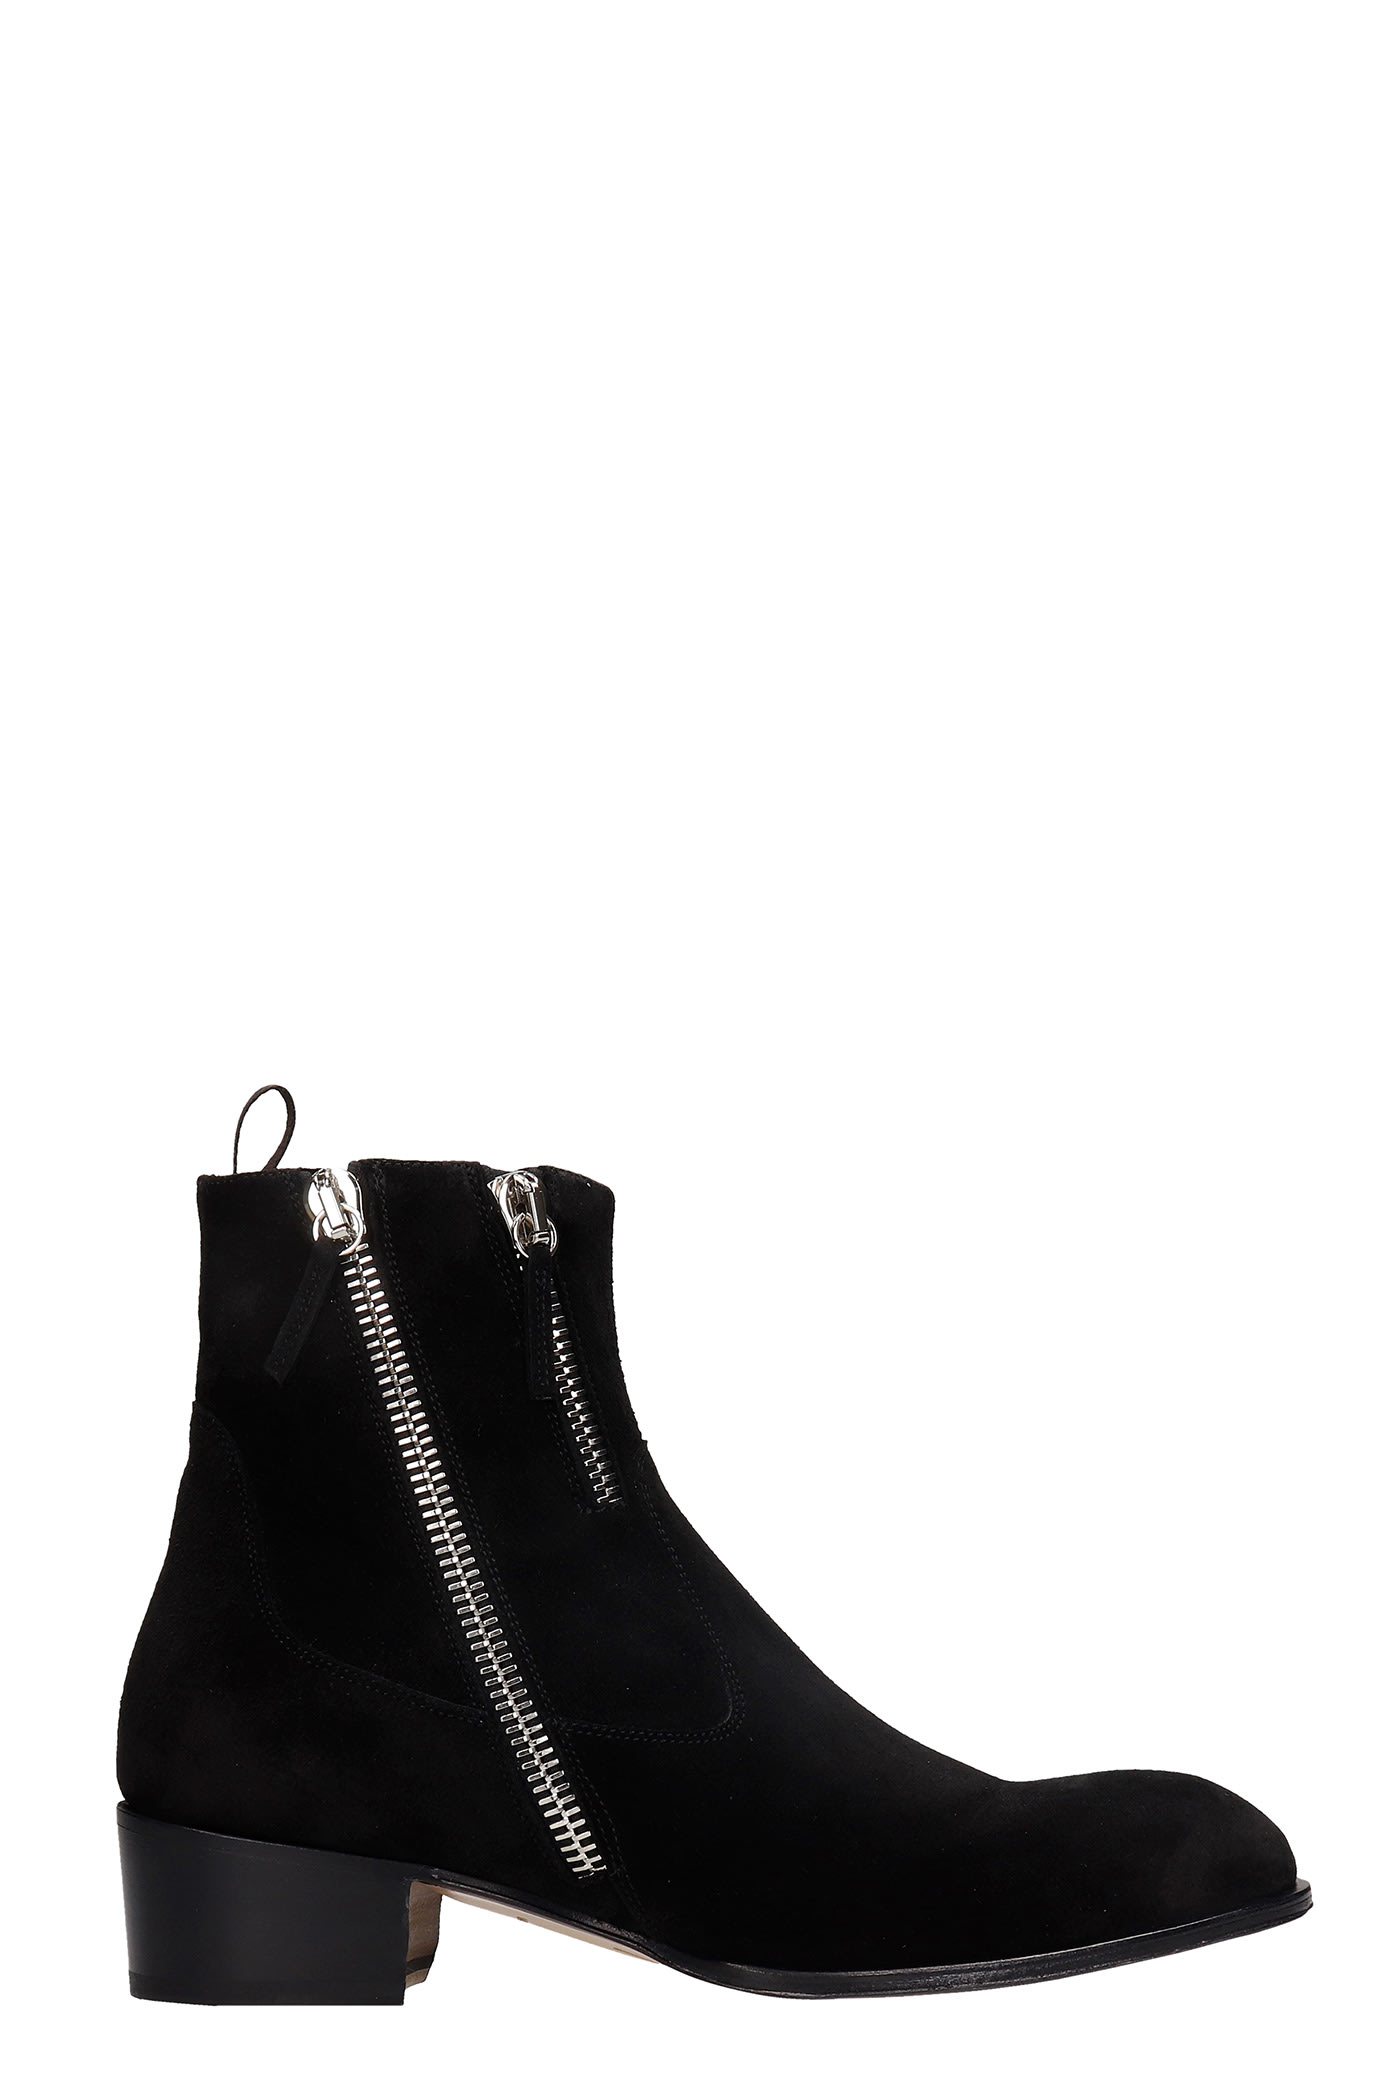 Giuseppe Zanotti Ascanio Ankle Boots In Black Suede